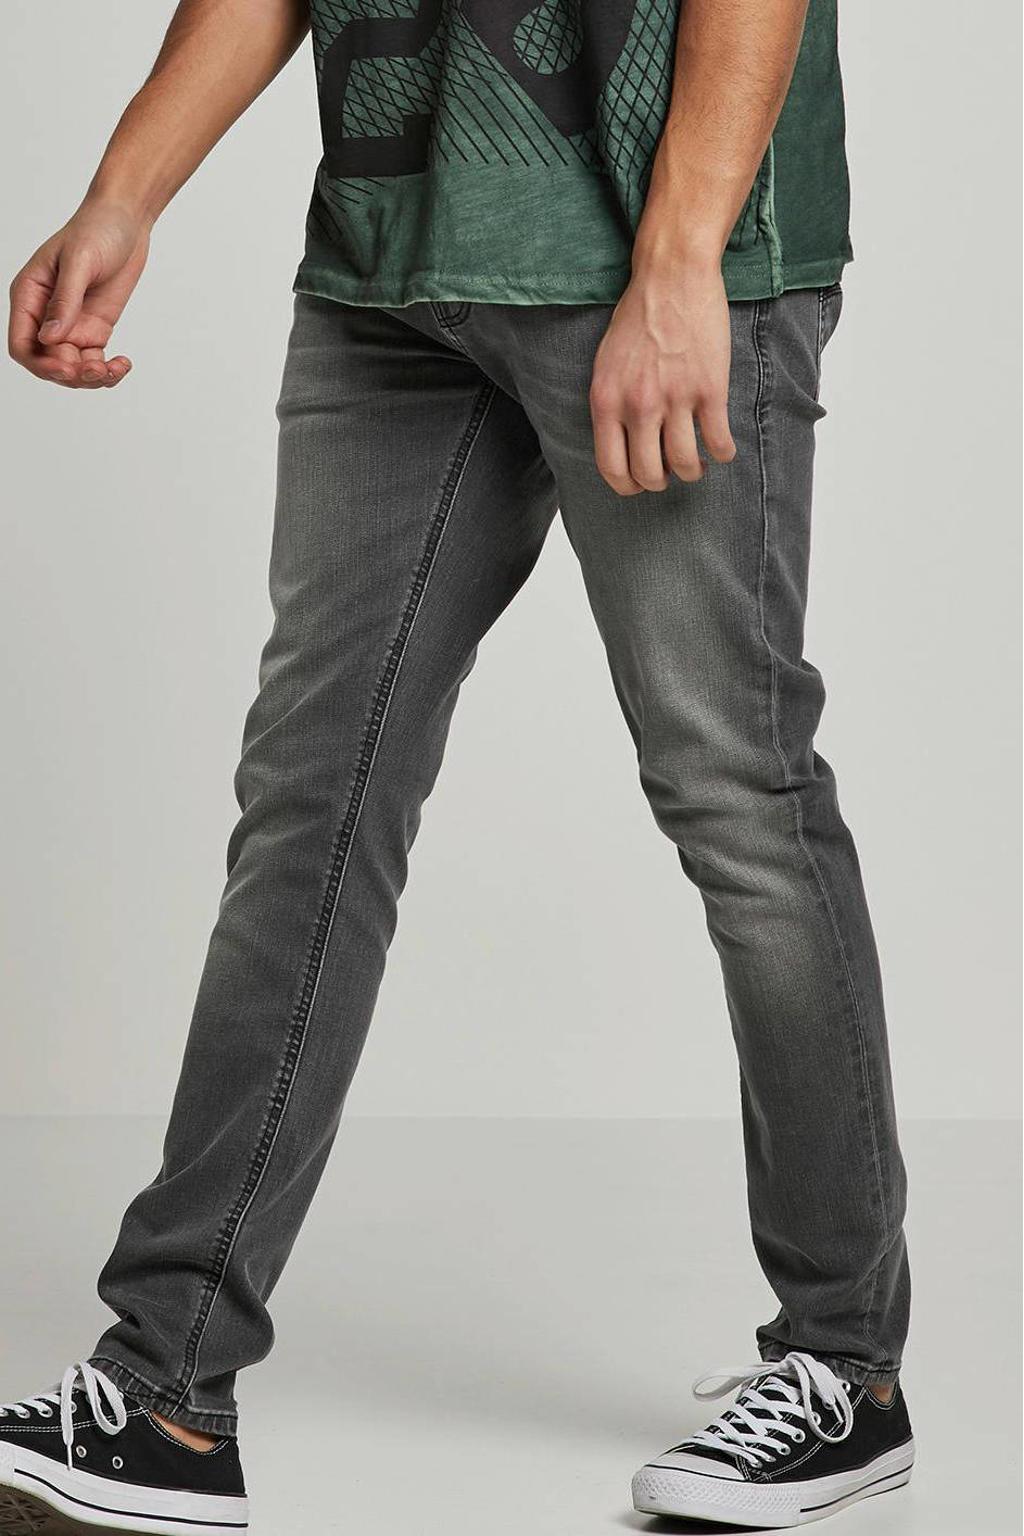 Nudie Jeans skinny jeans Thight Terry mid grey